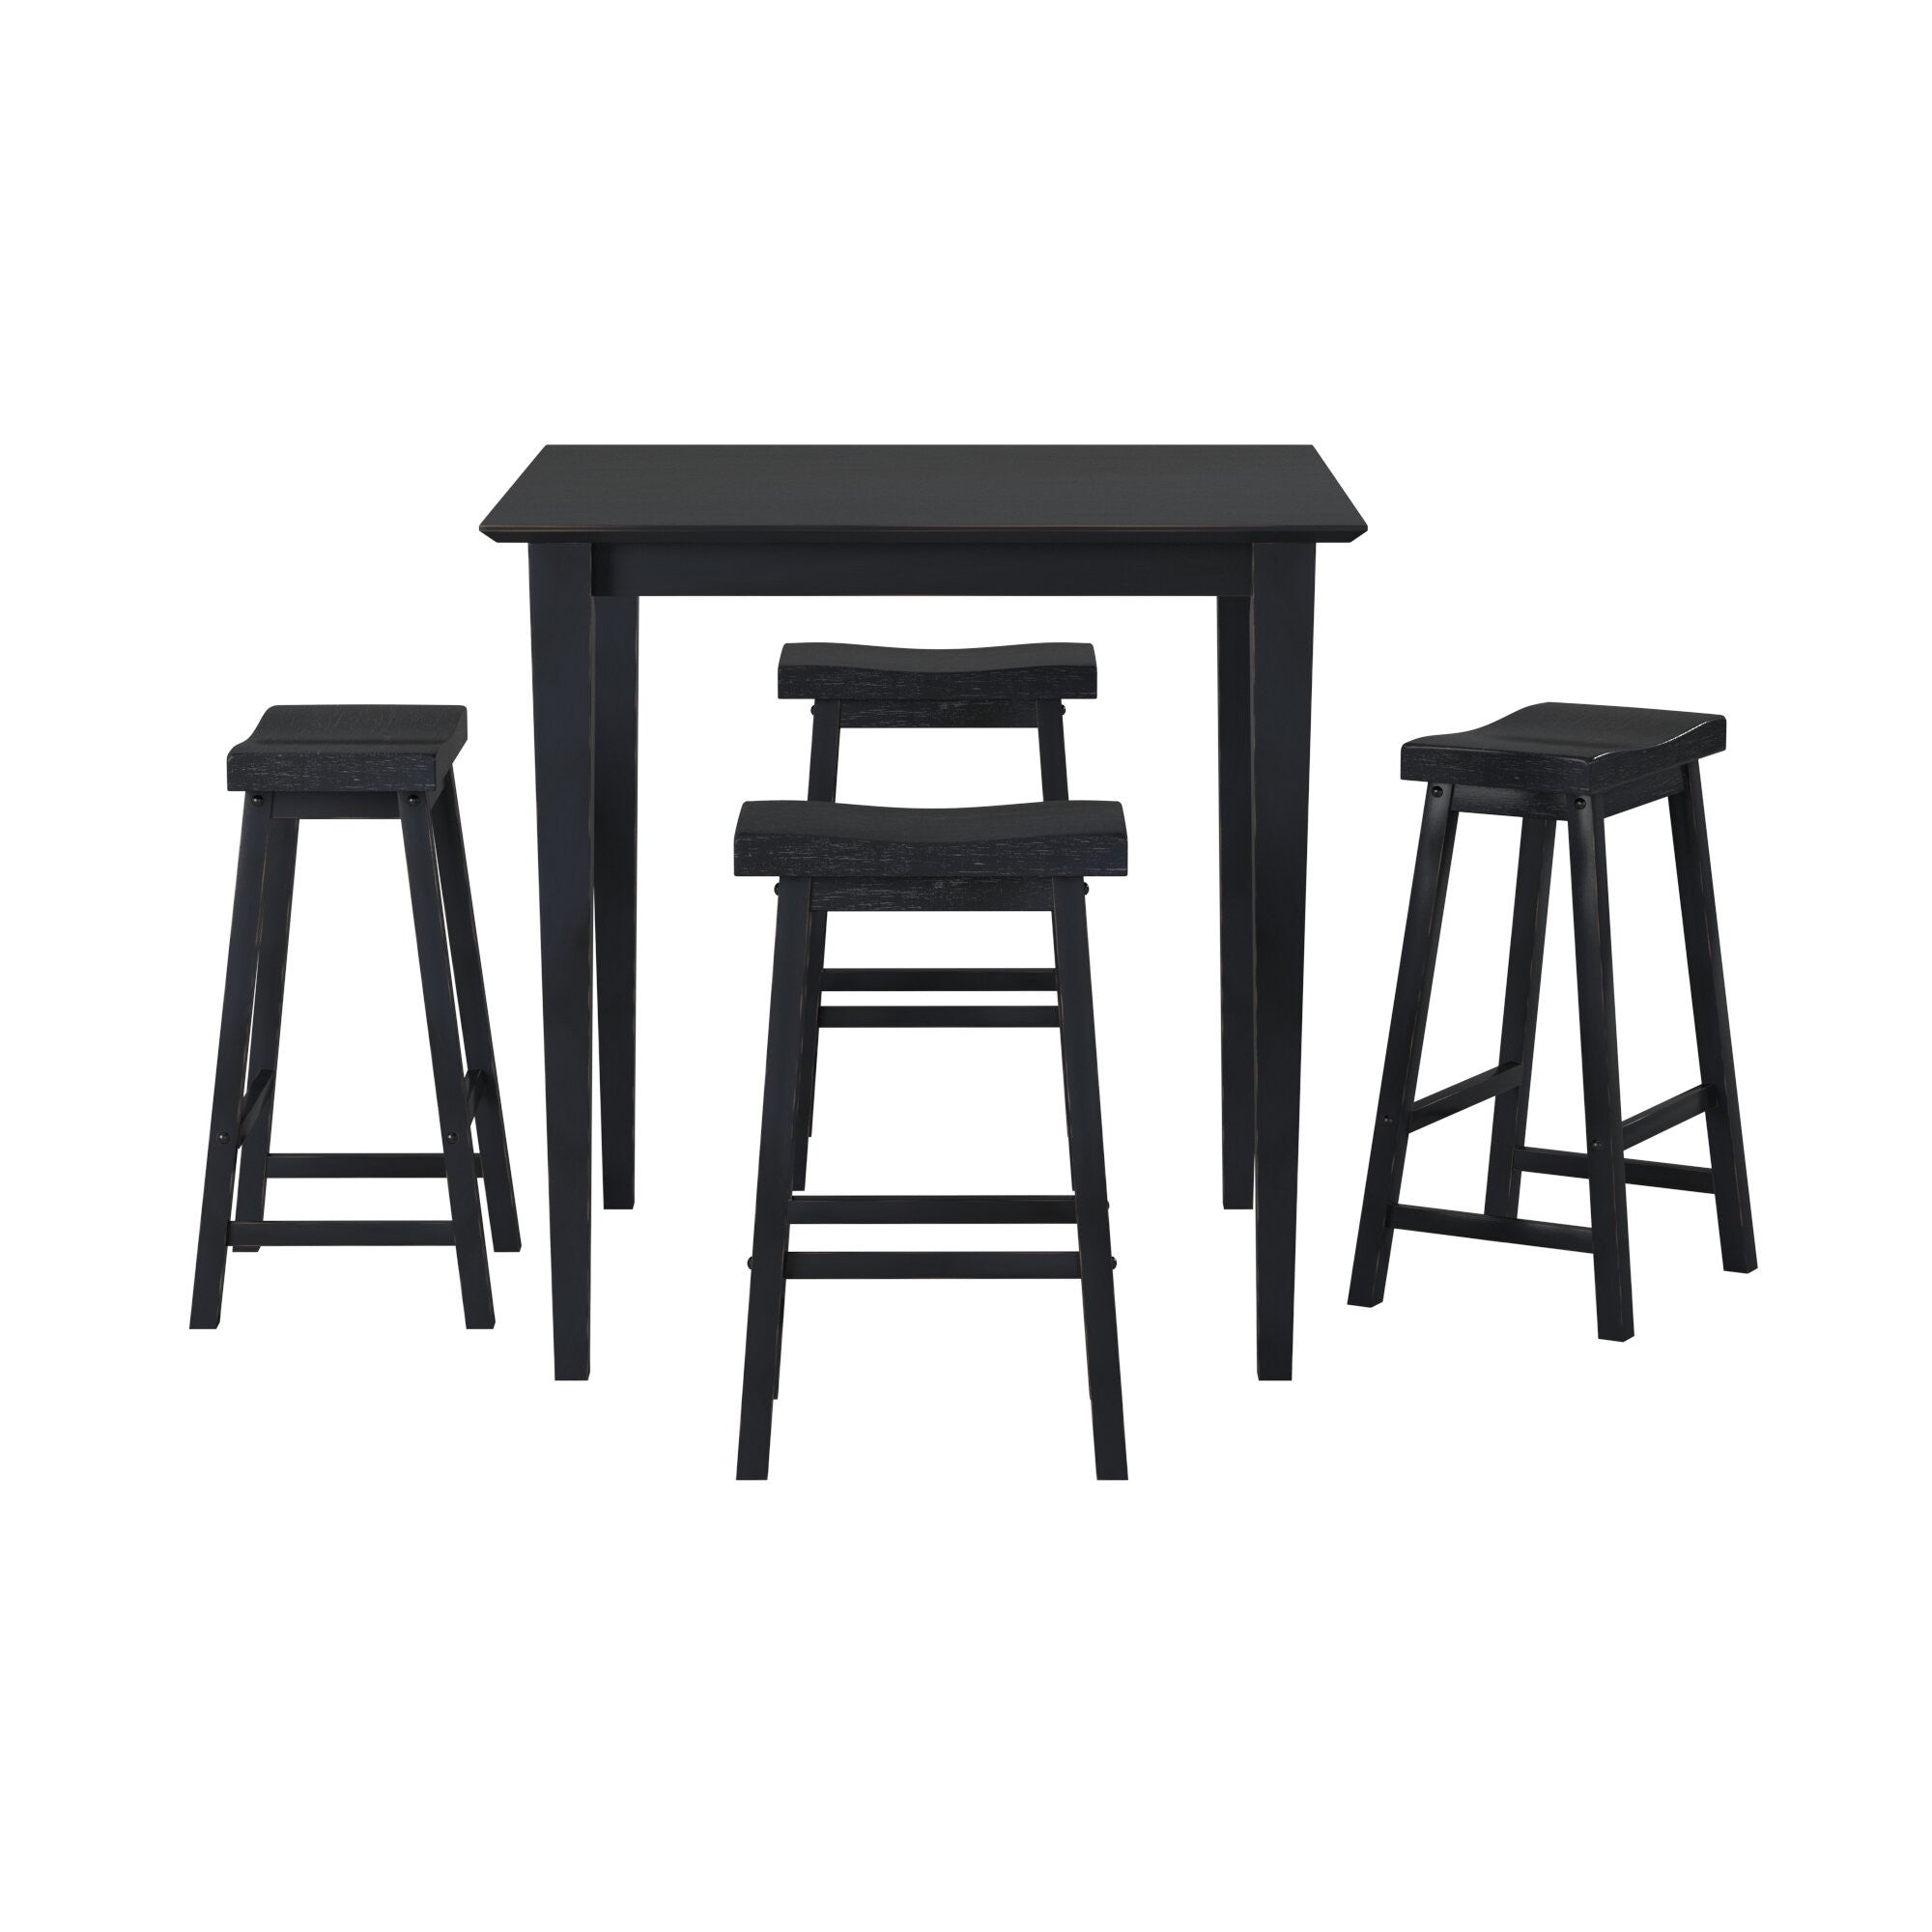 Black Finish 29 inch Bar Height Stools Set of 2pc black-dining room-solid wood